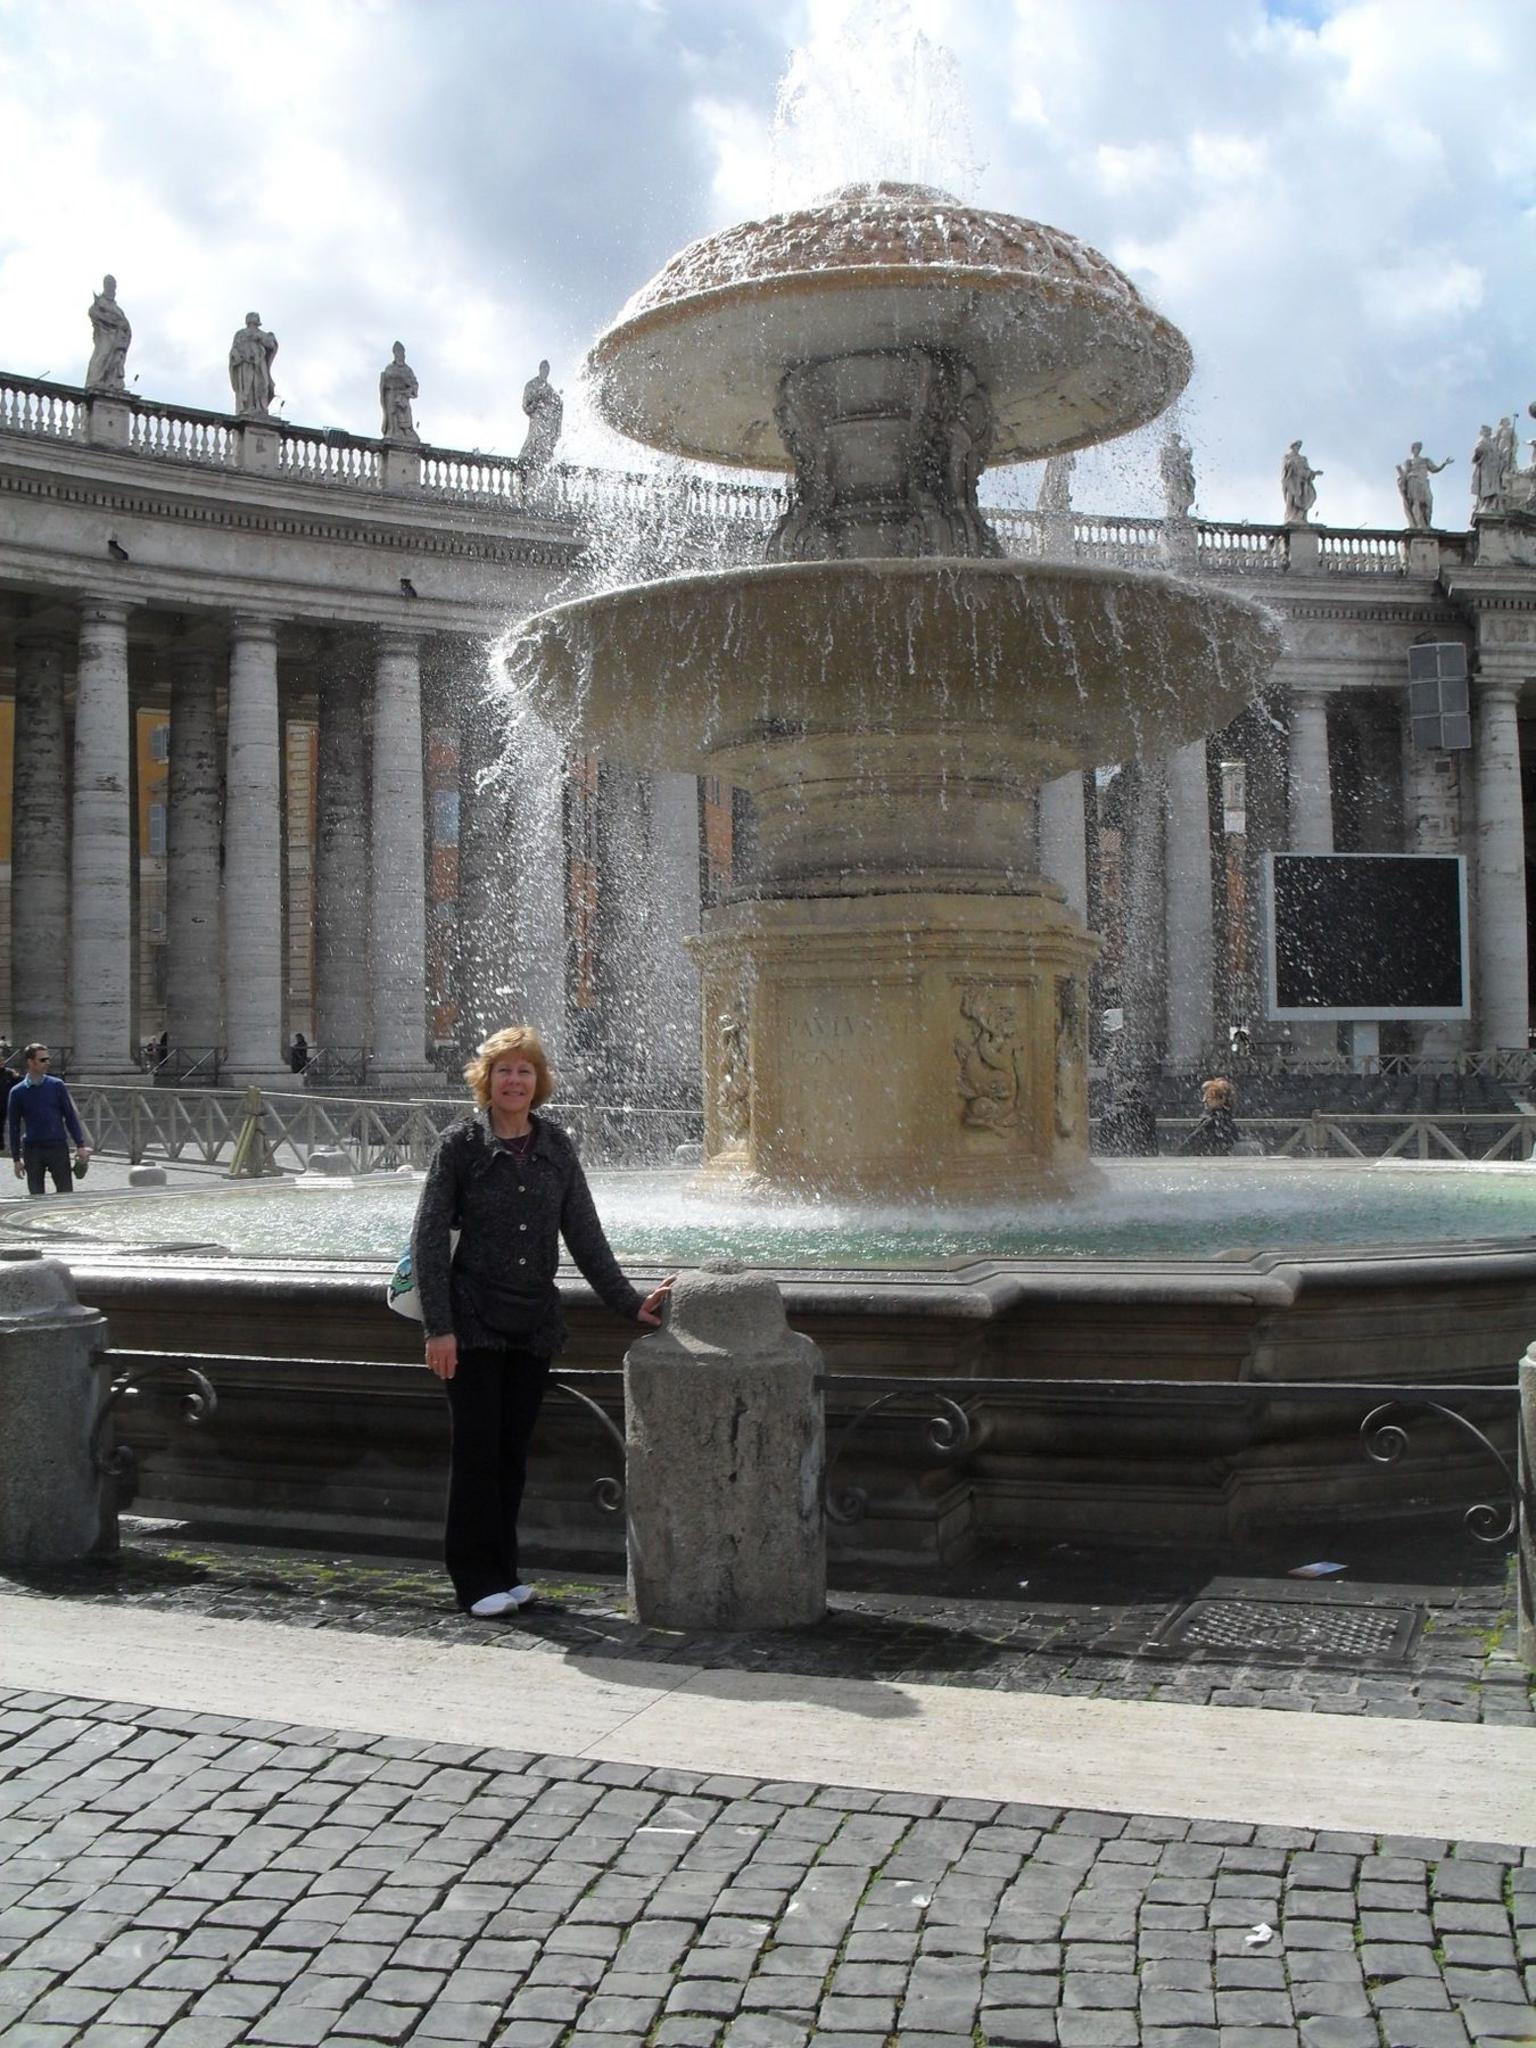 A Fountain at the Vatican